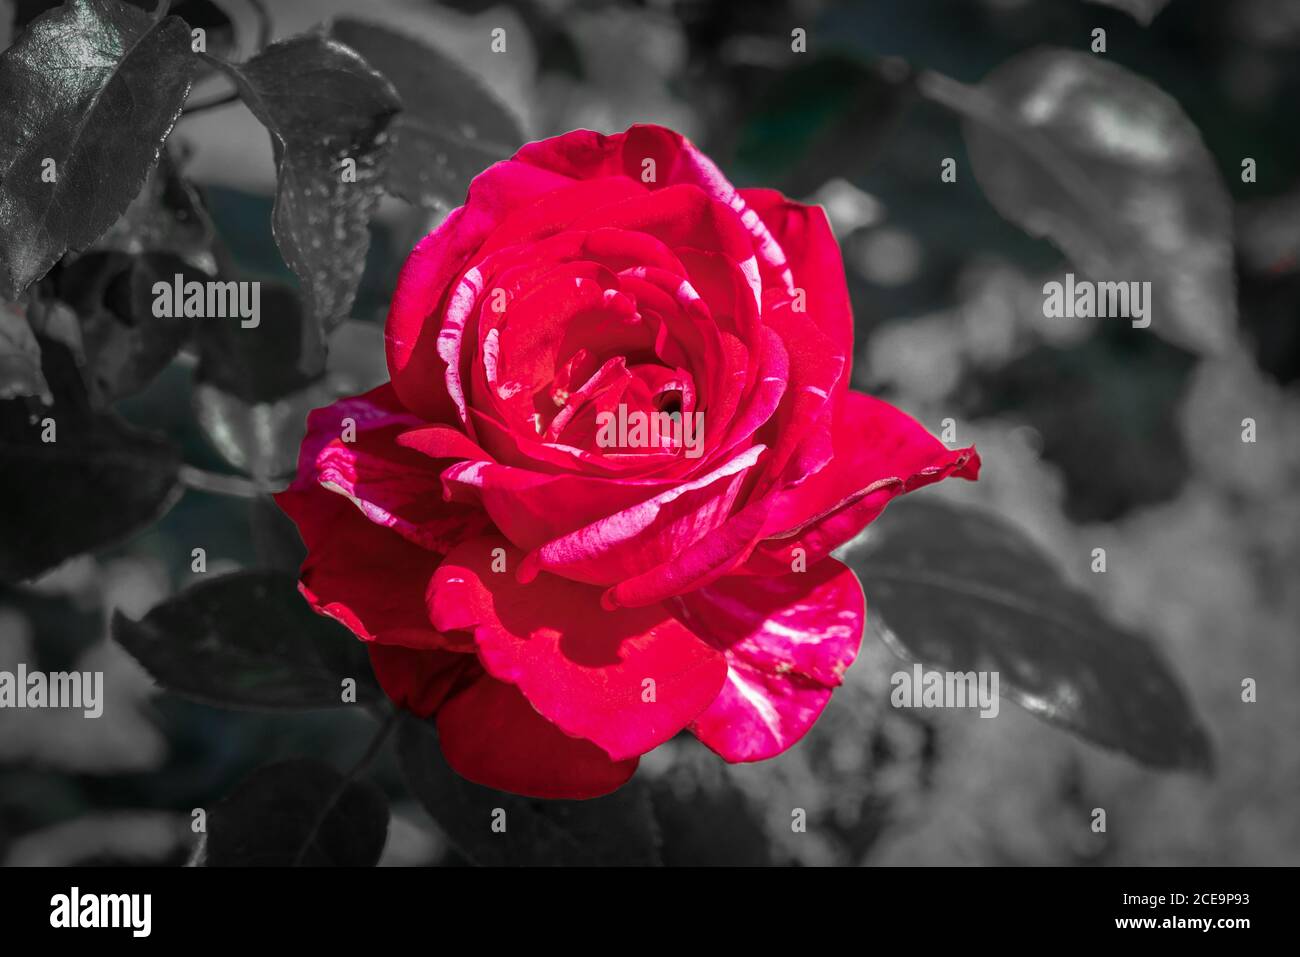 Colorful close up of a red 'Crazy fashion' rose with monochrome background Stock Photo